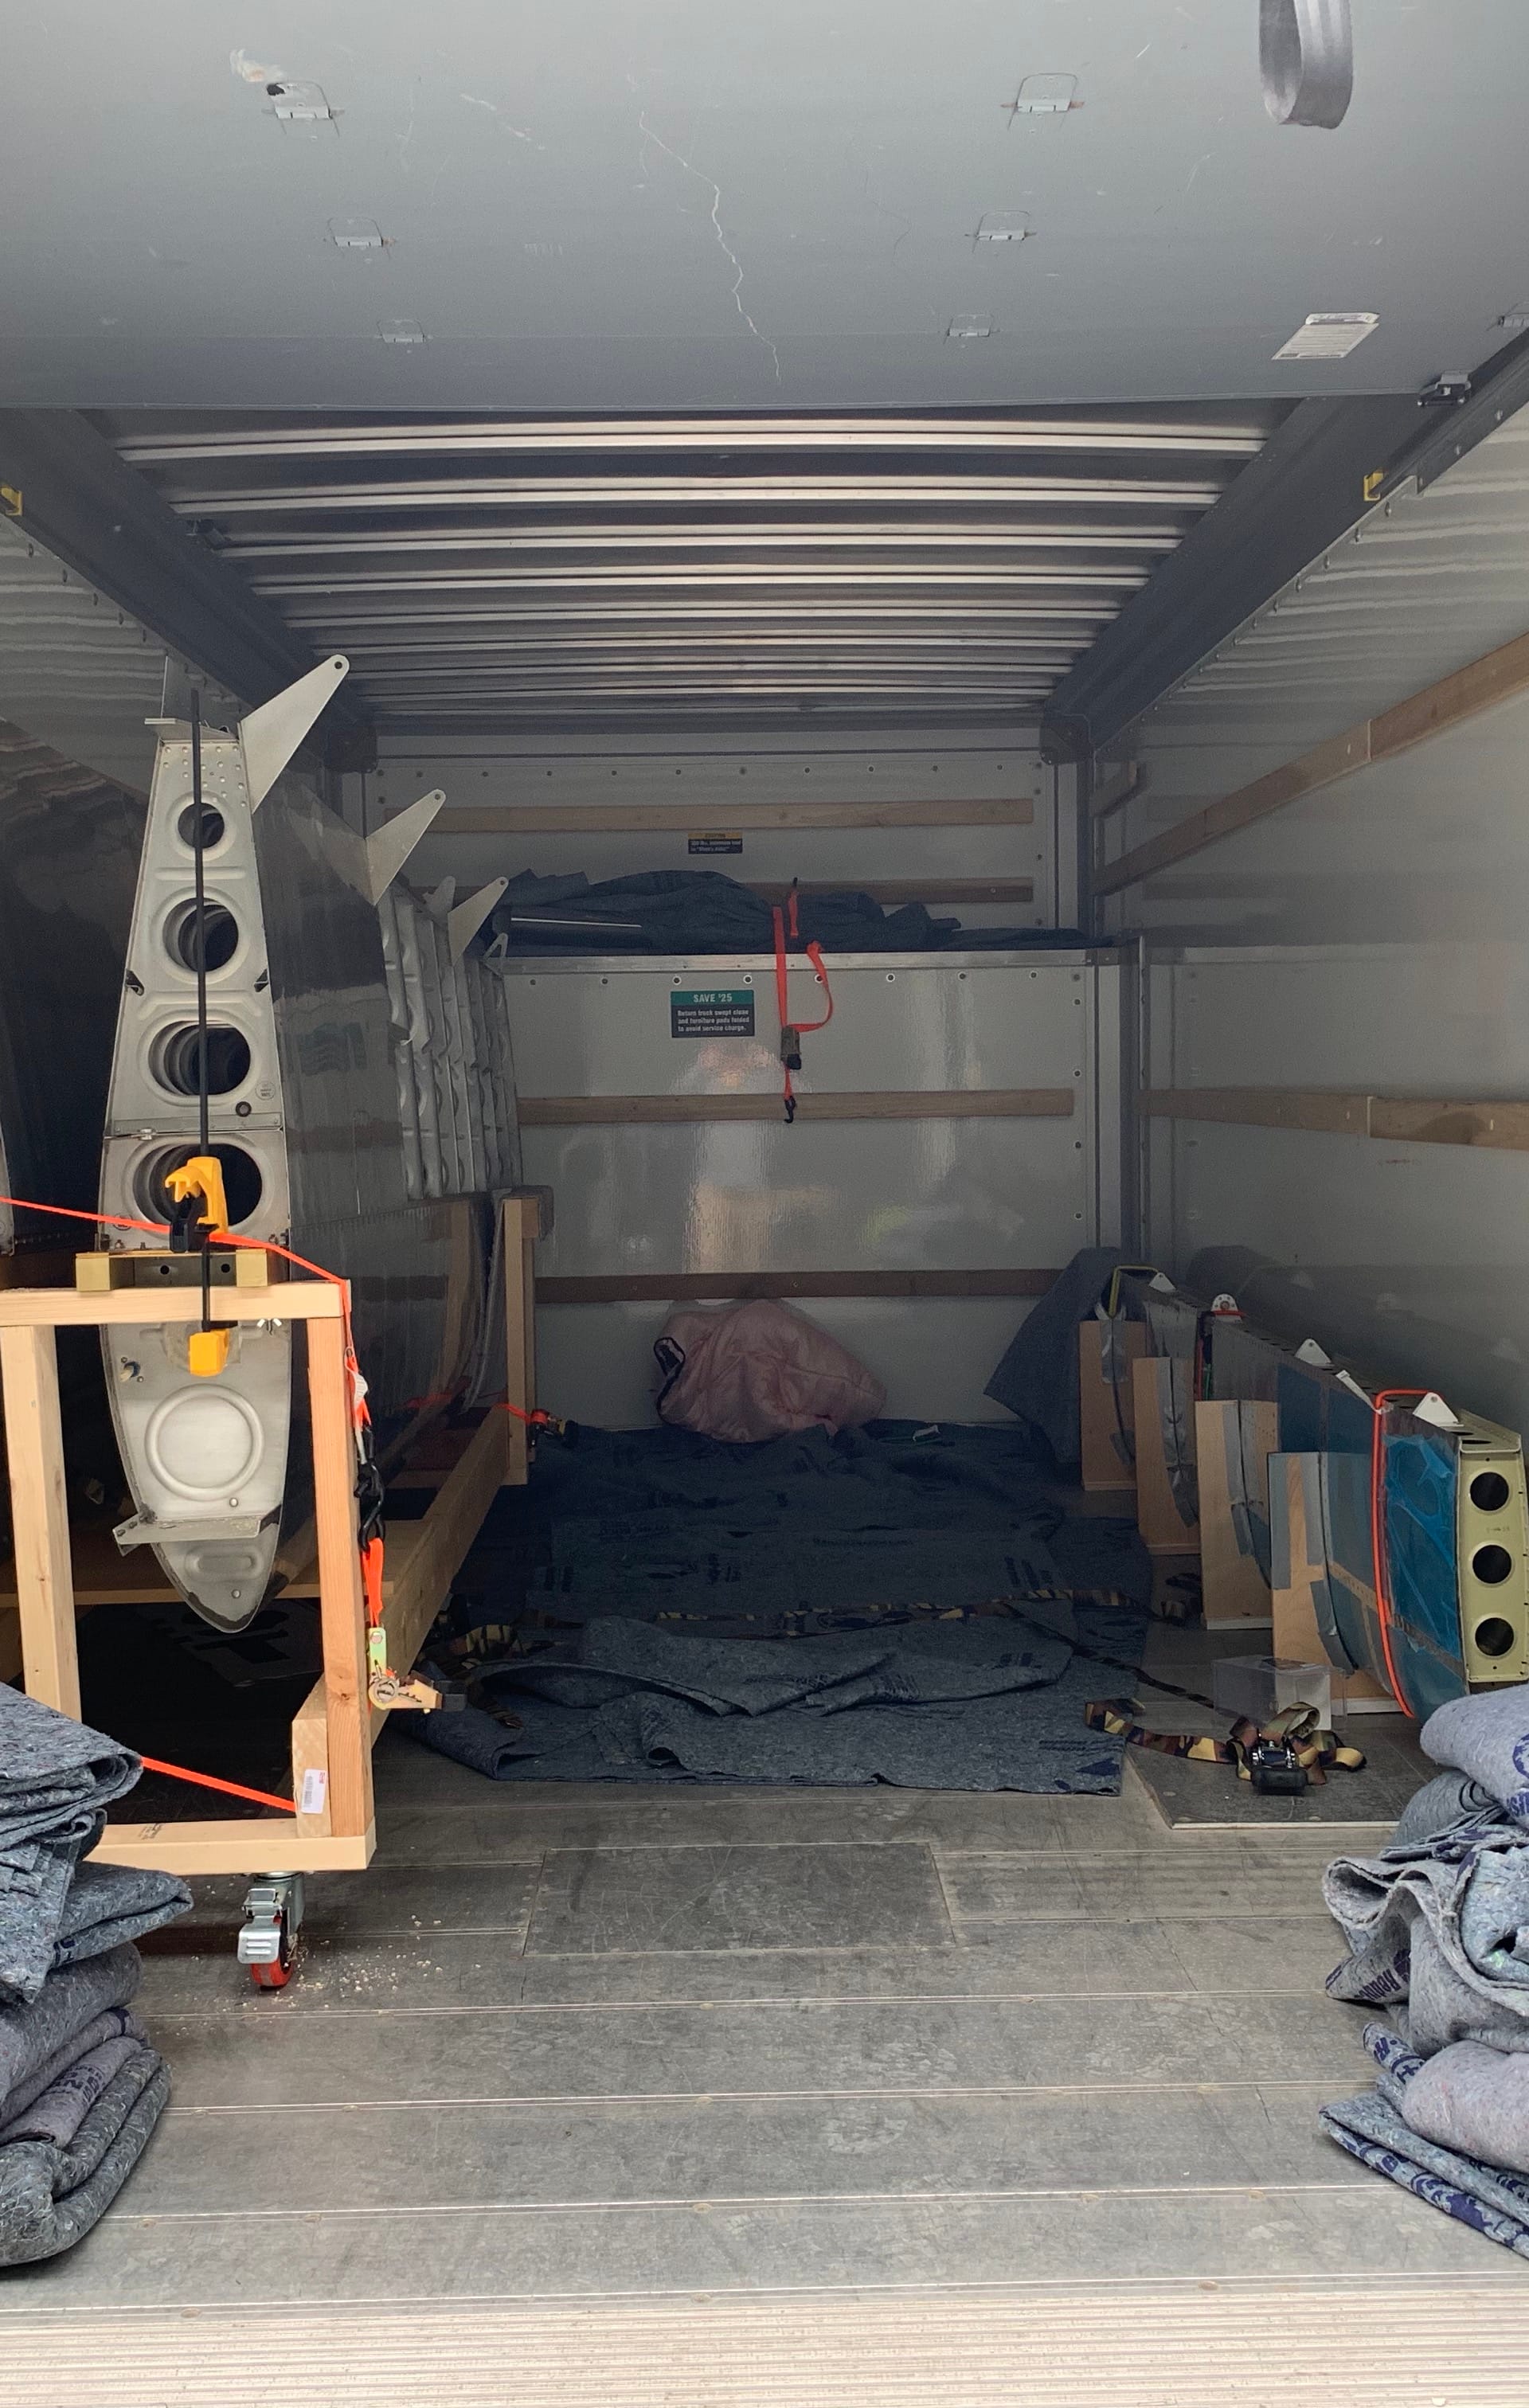 Moving van packed with airplane parts